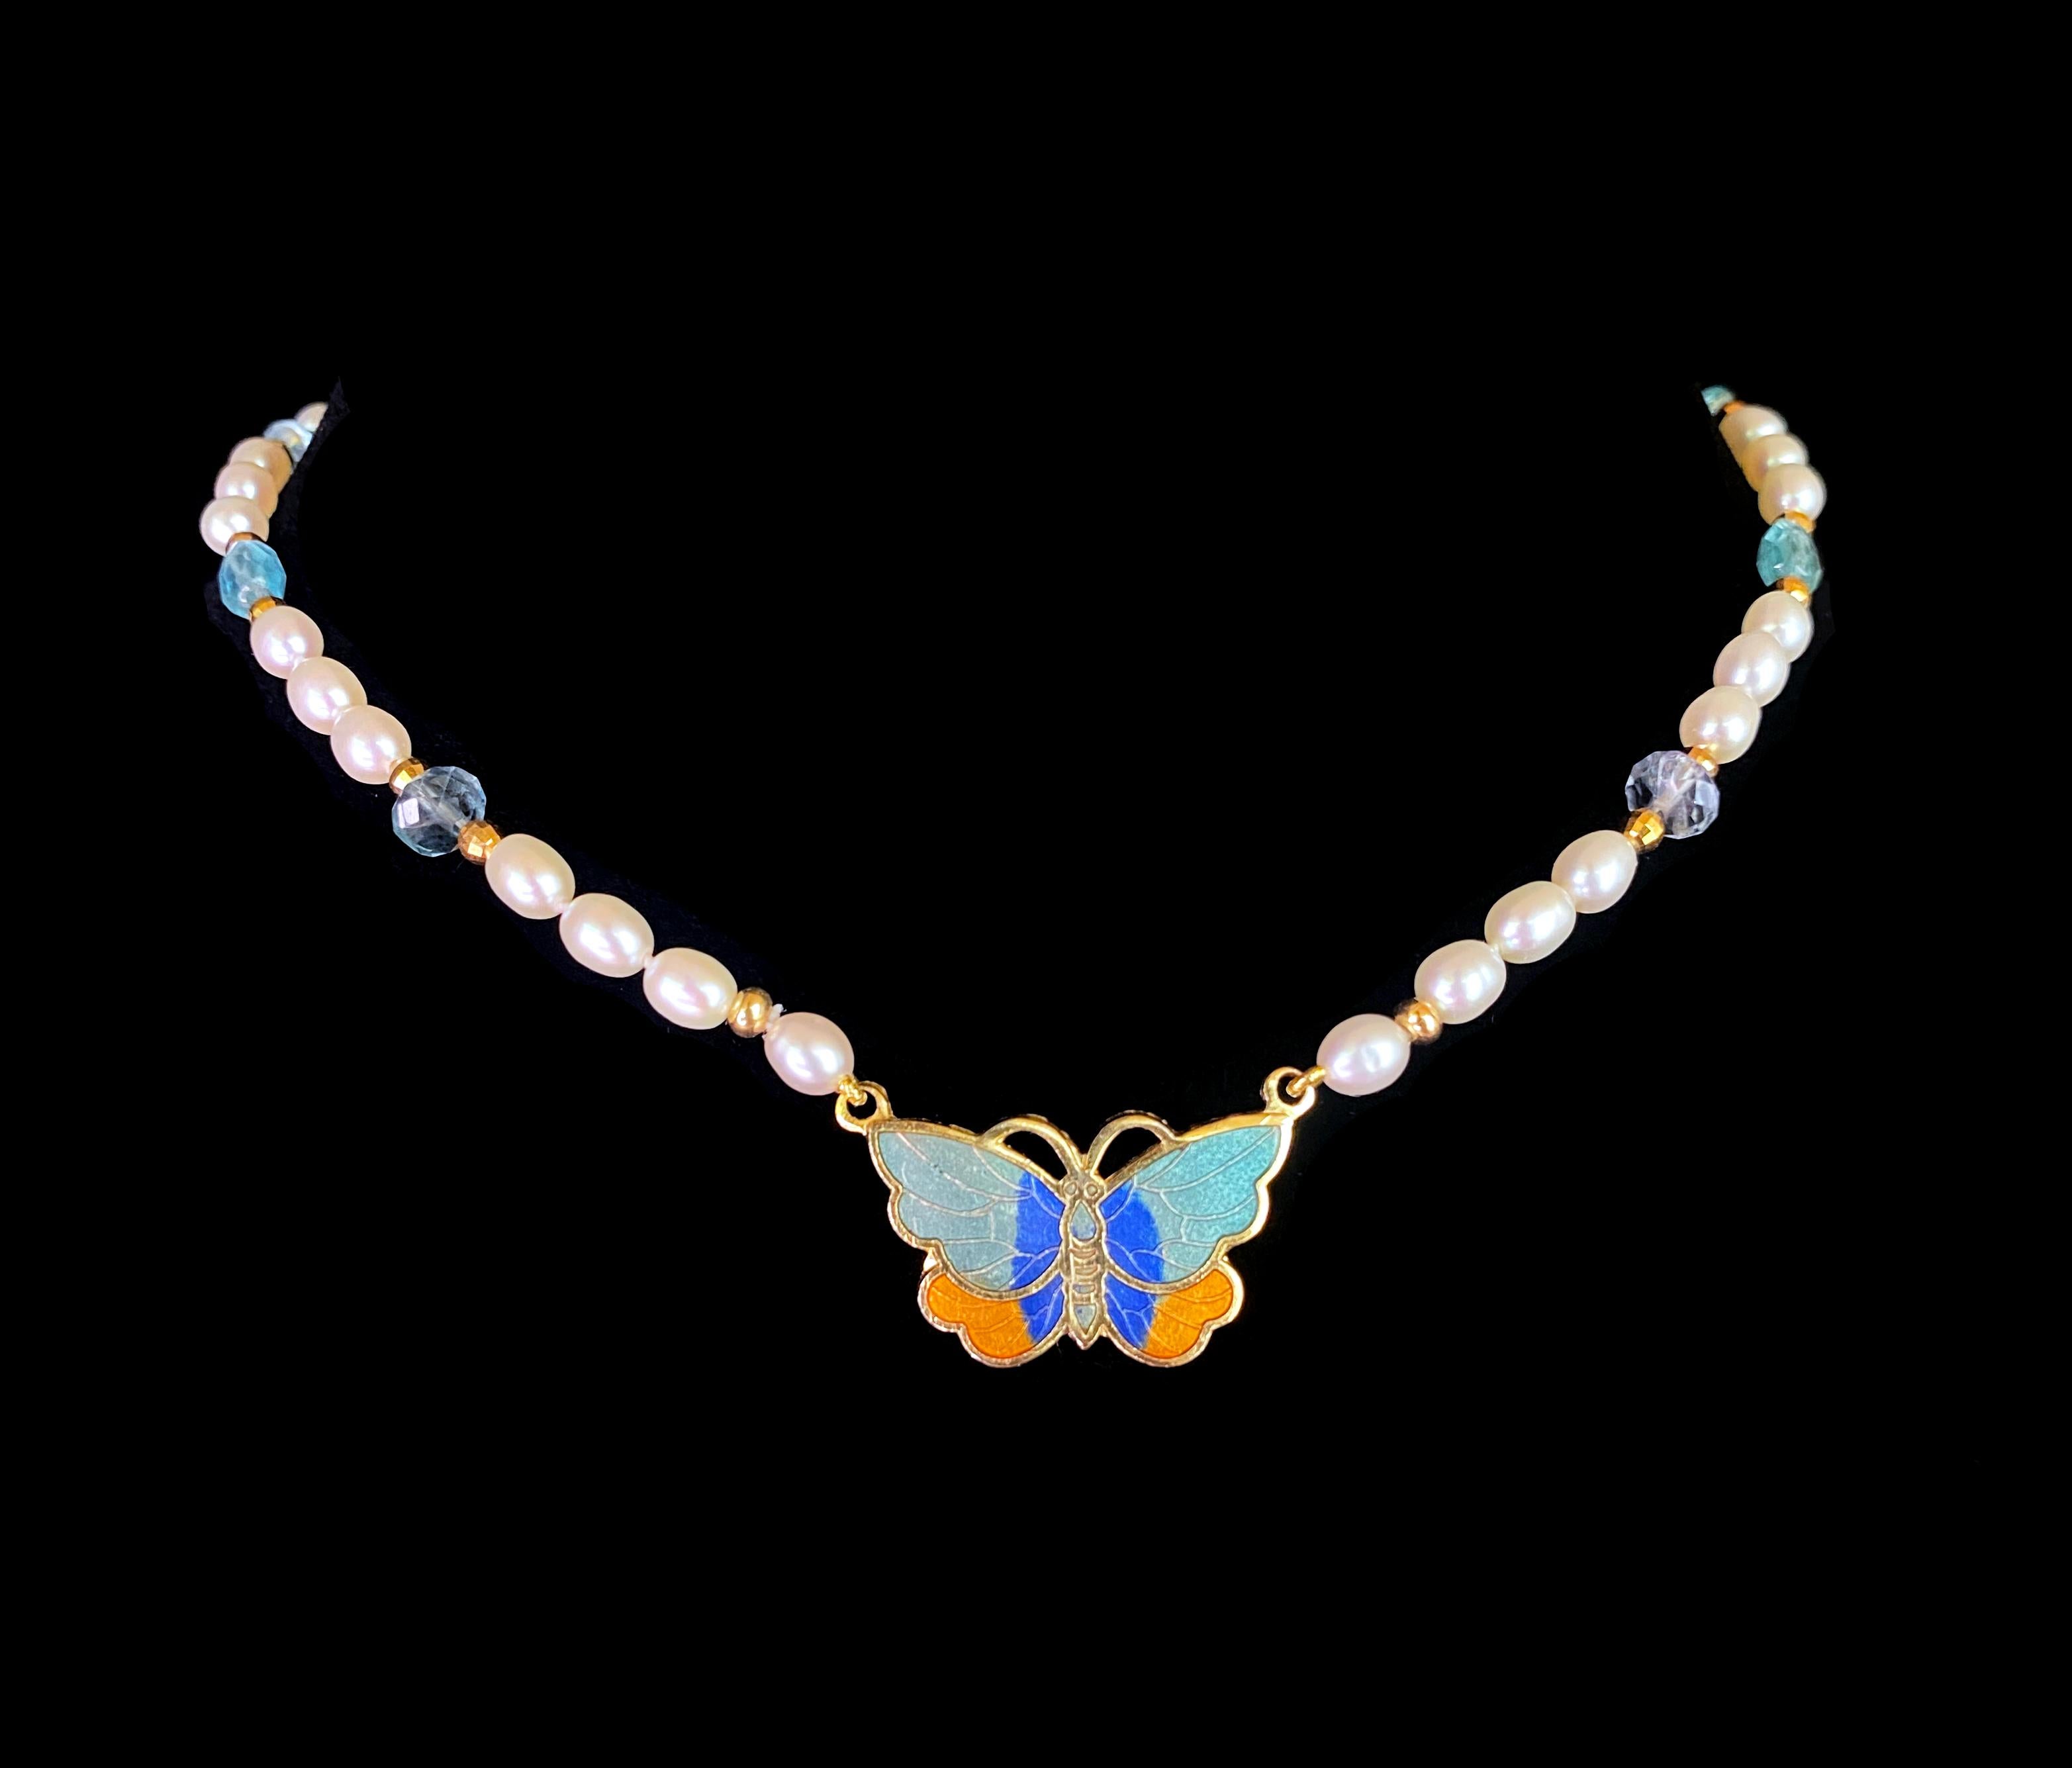 Bead Marina J For Girls Pearl Necklace with Aquamarine & 18k Enameled Butterfly For Sale